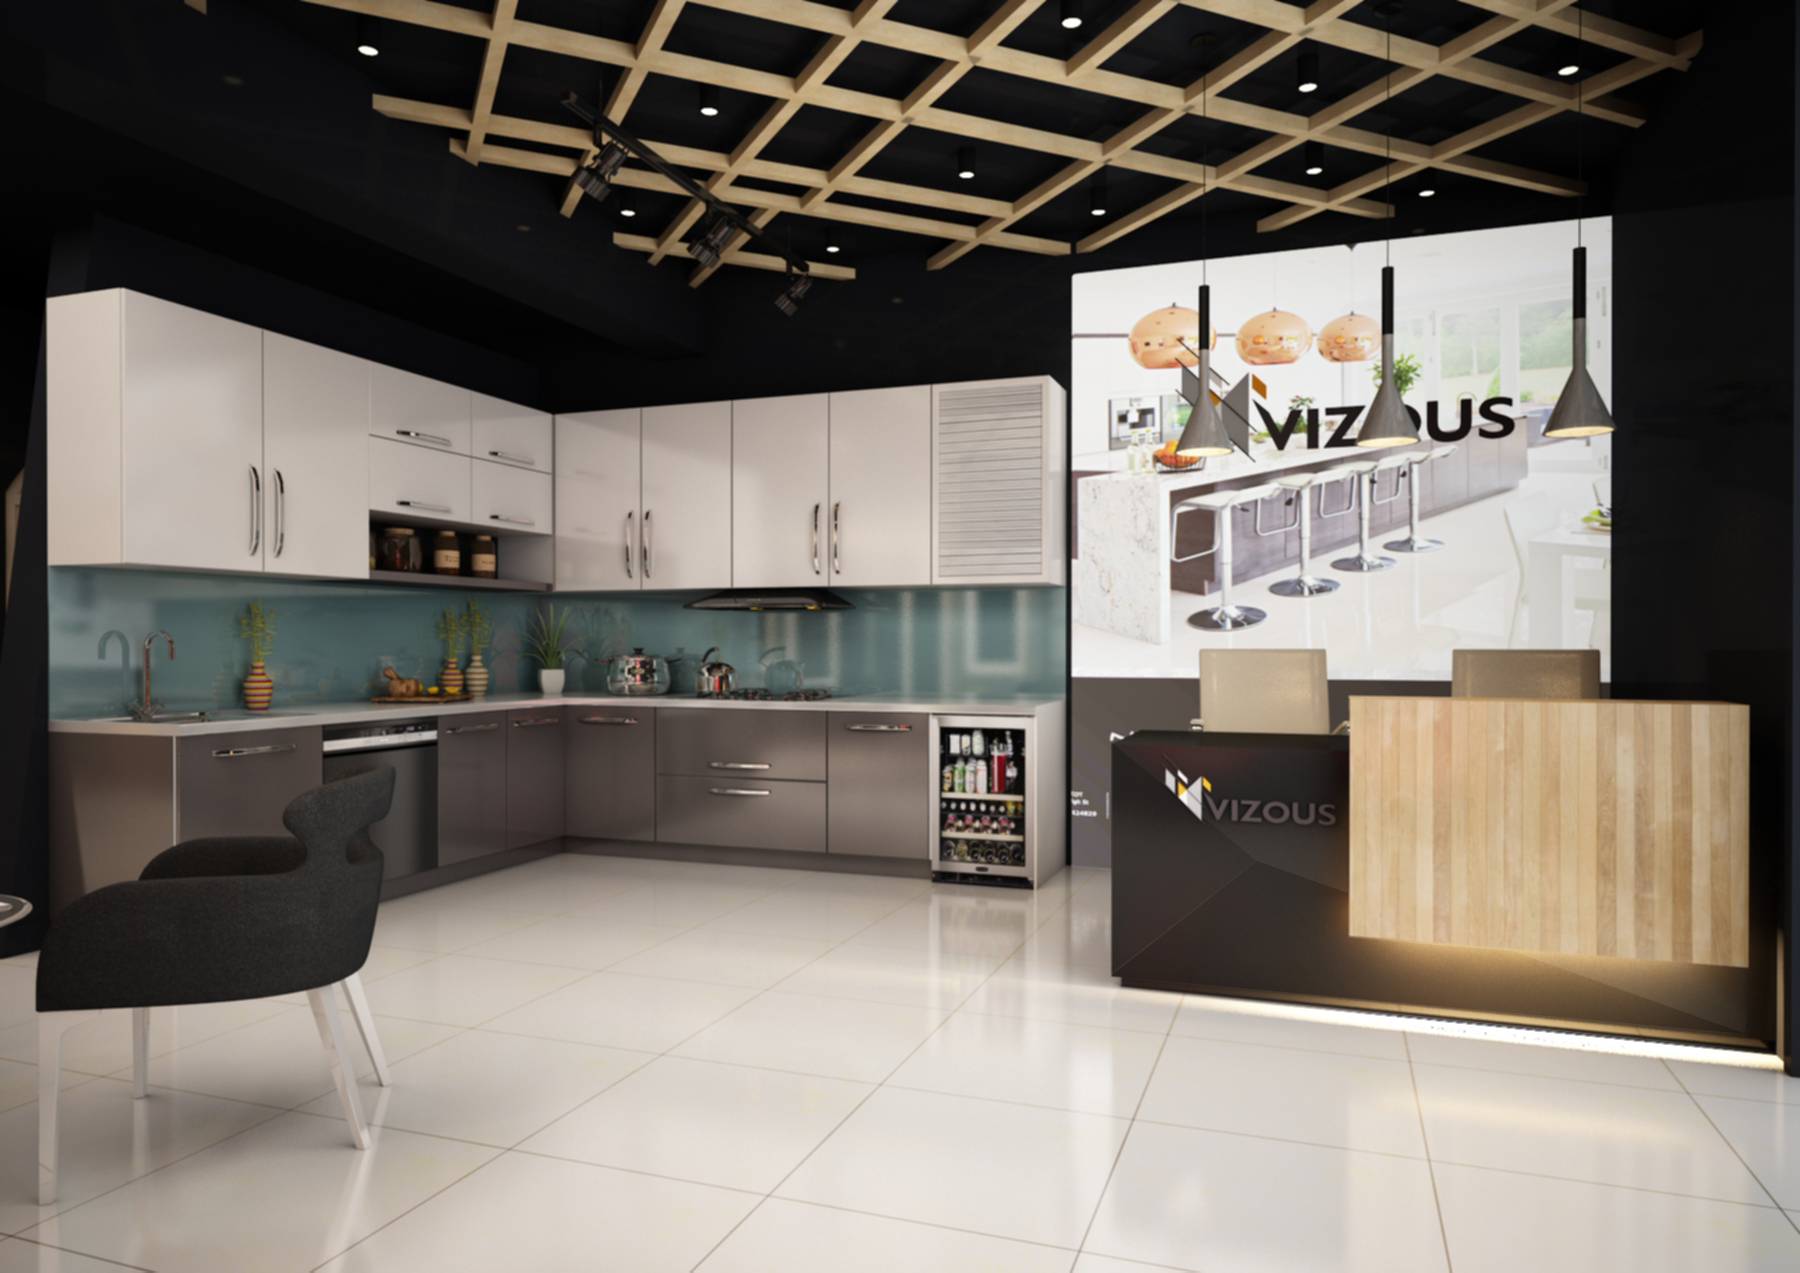 Contemporary showroom reception area design with kitchen display.